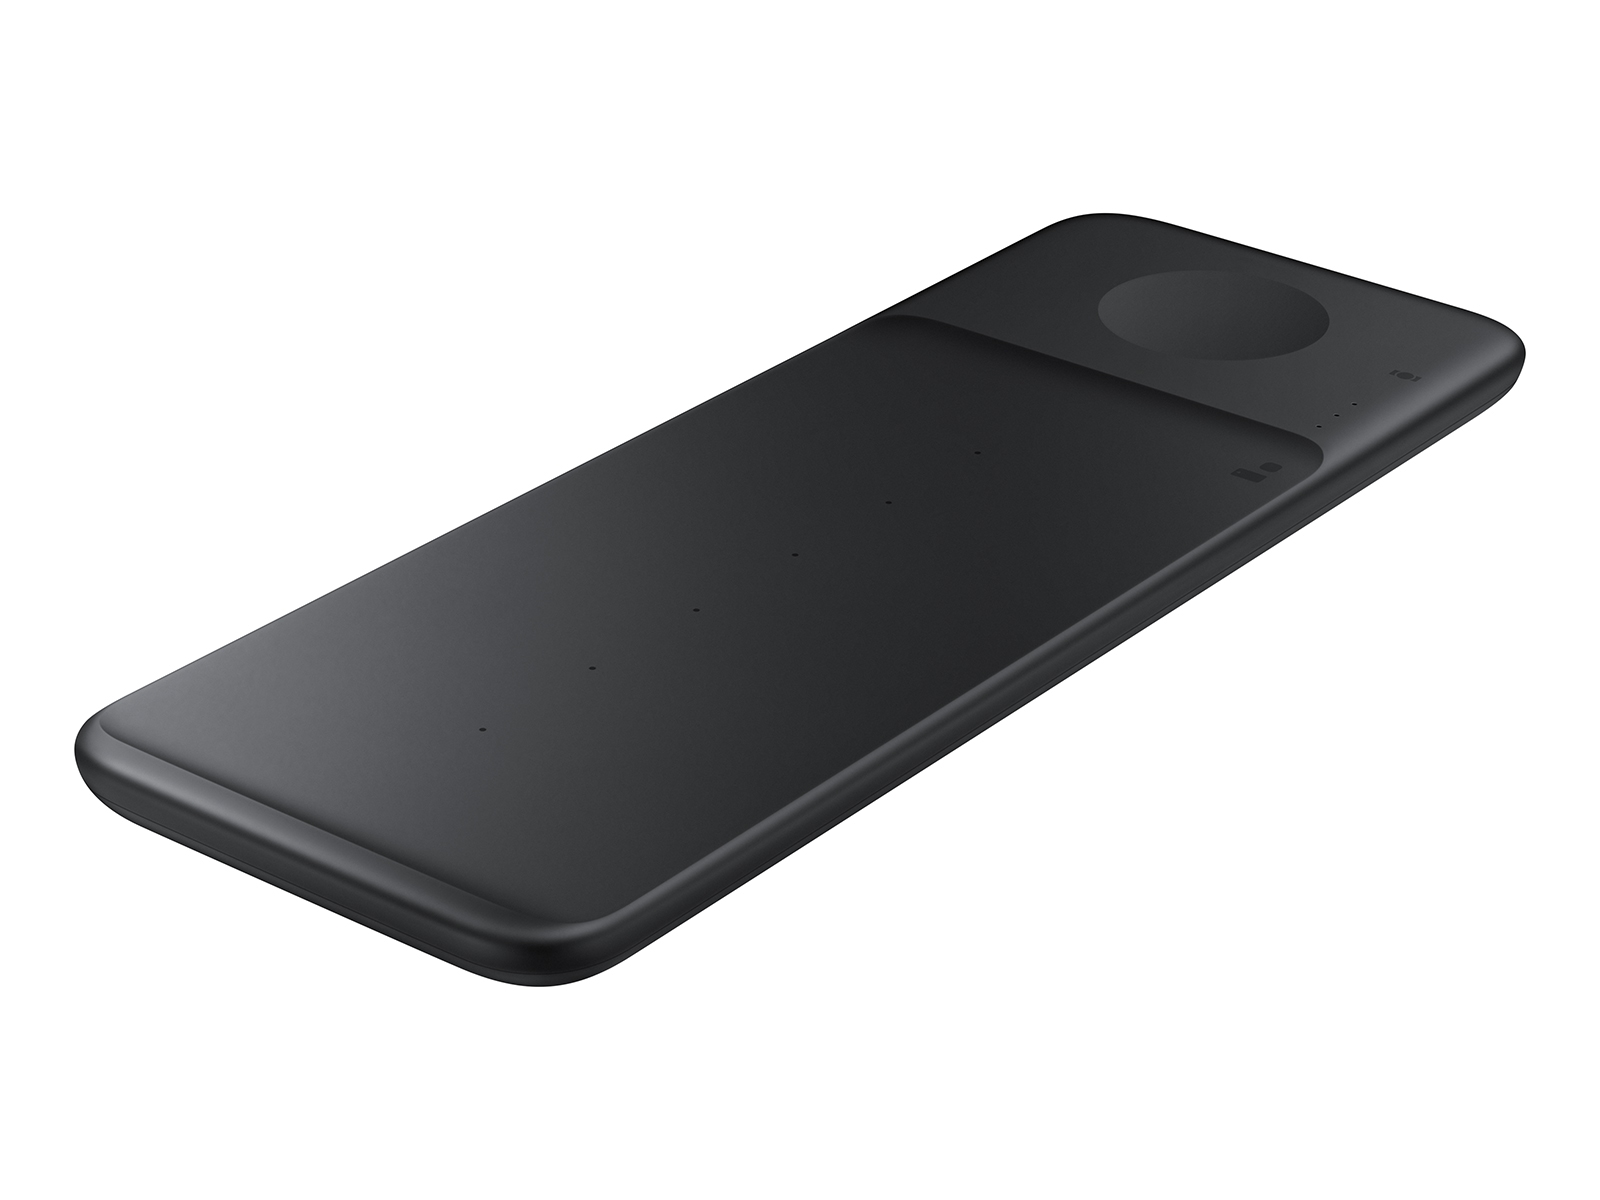 Wireless Charger Trio, Black Mobile Accessories - EP-P6300TBEGUS